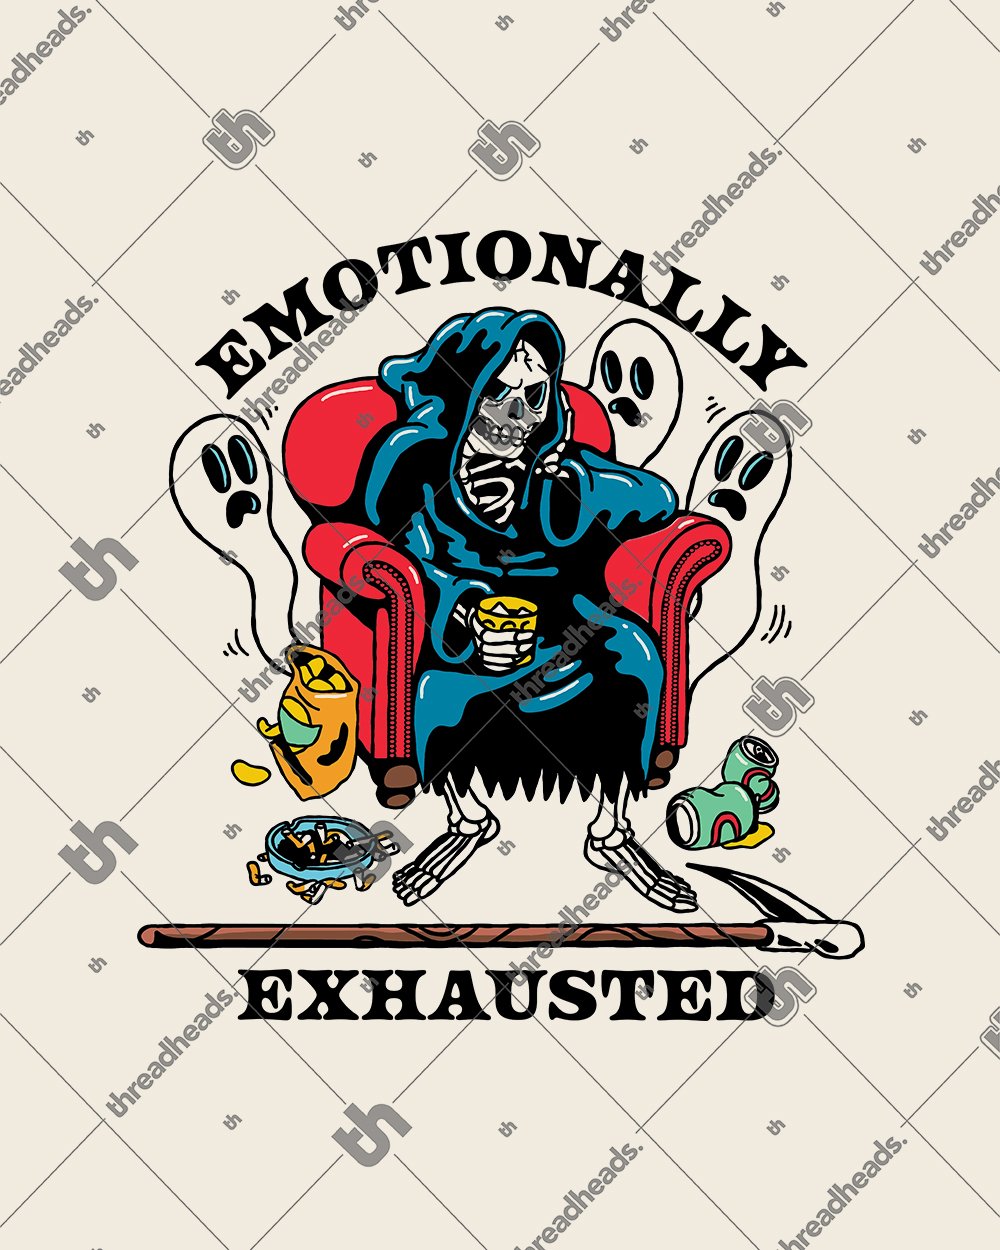 Emotionally Exhausted T-Shirt Australia Online #colour_natural